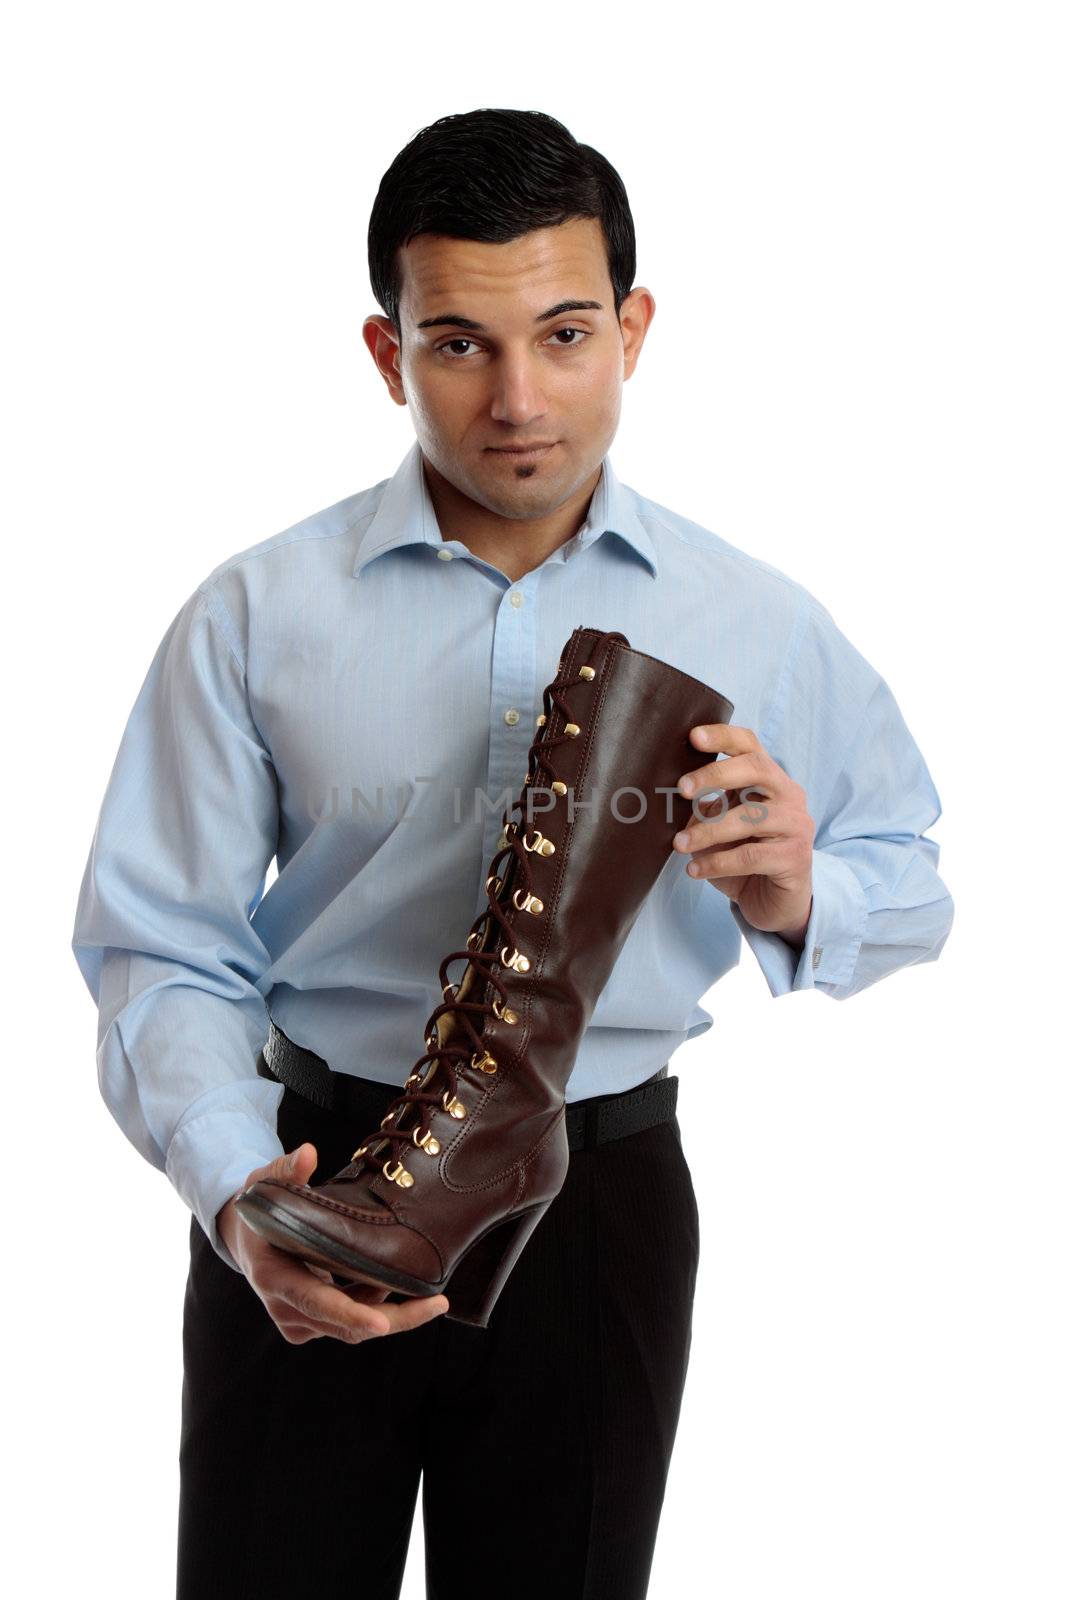 A shoe salesman holding a brown leather lace up boot.  White background.